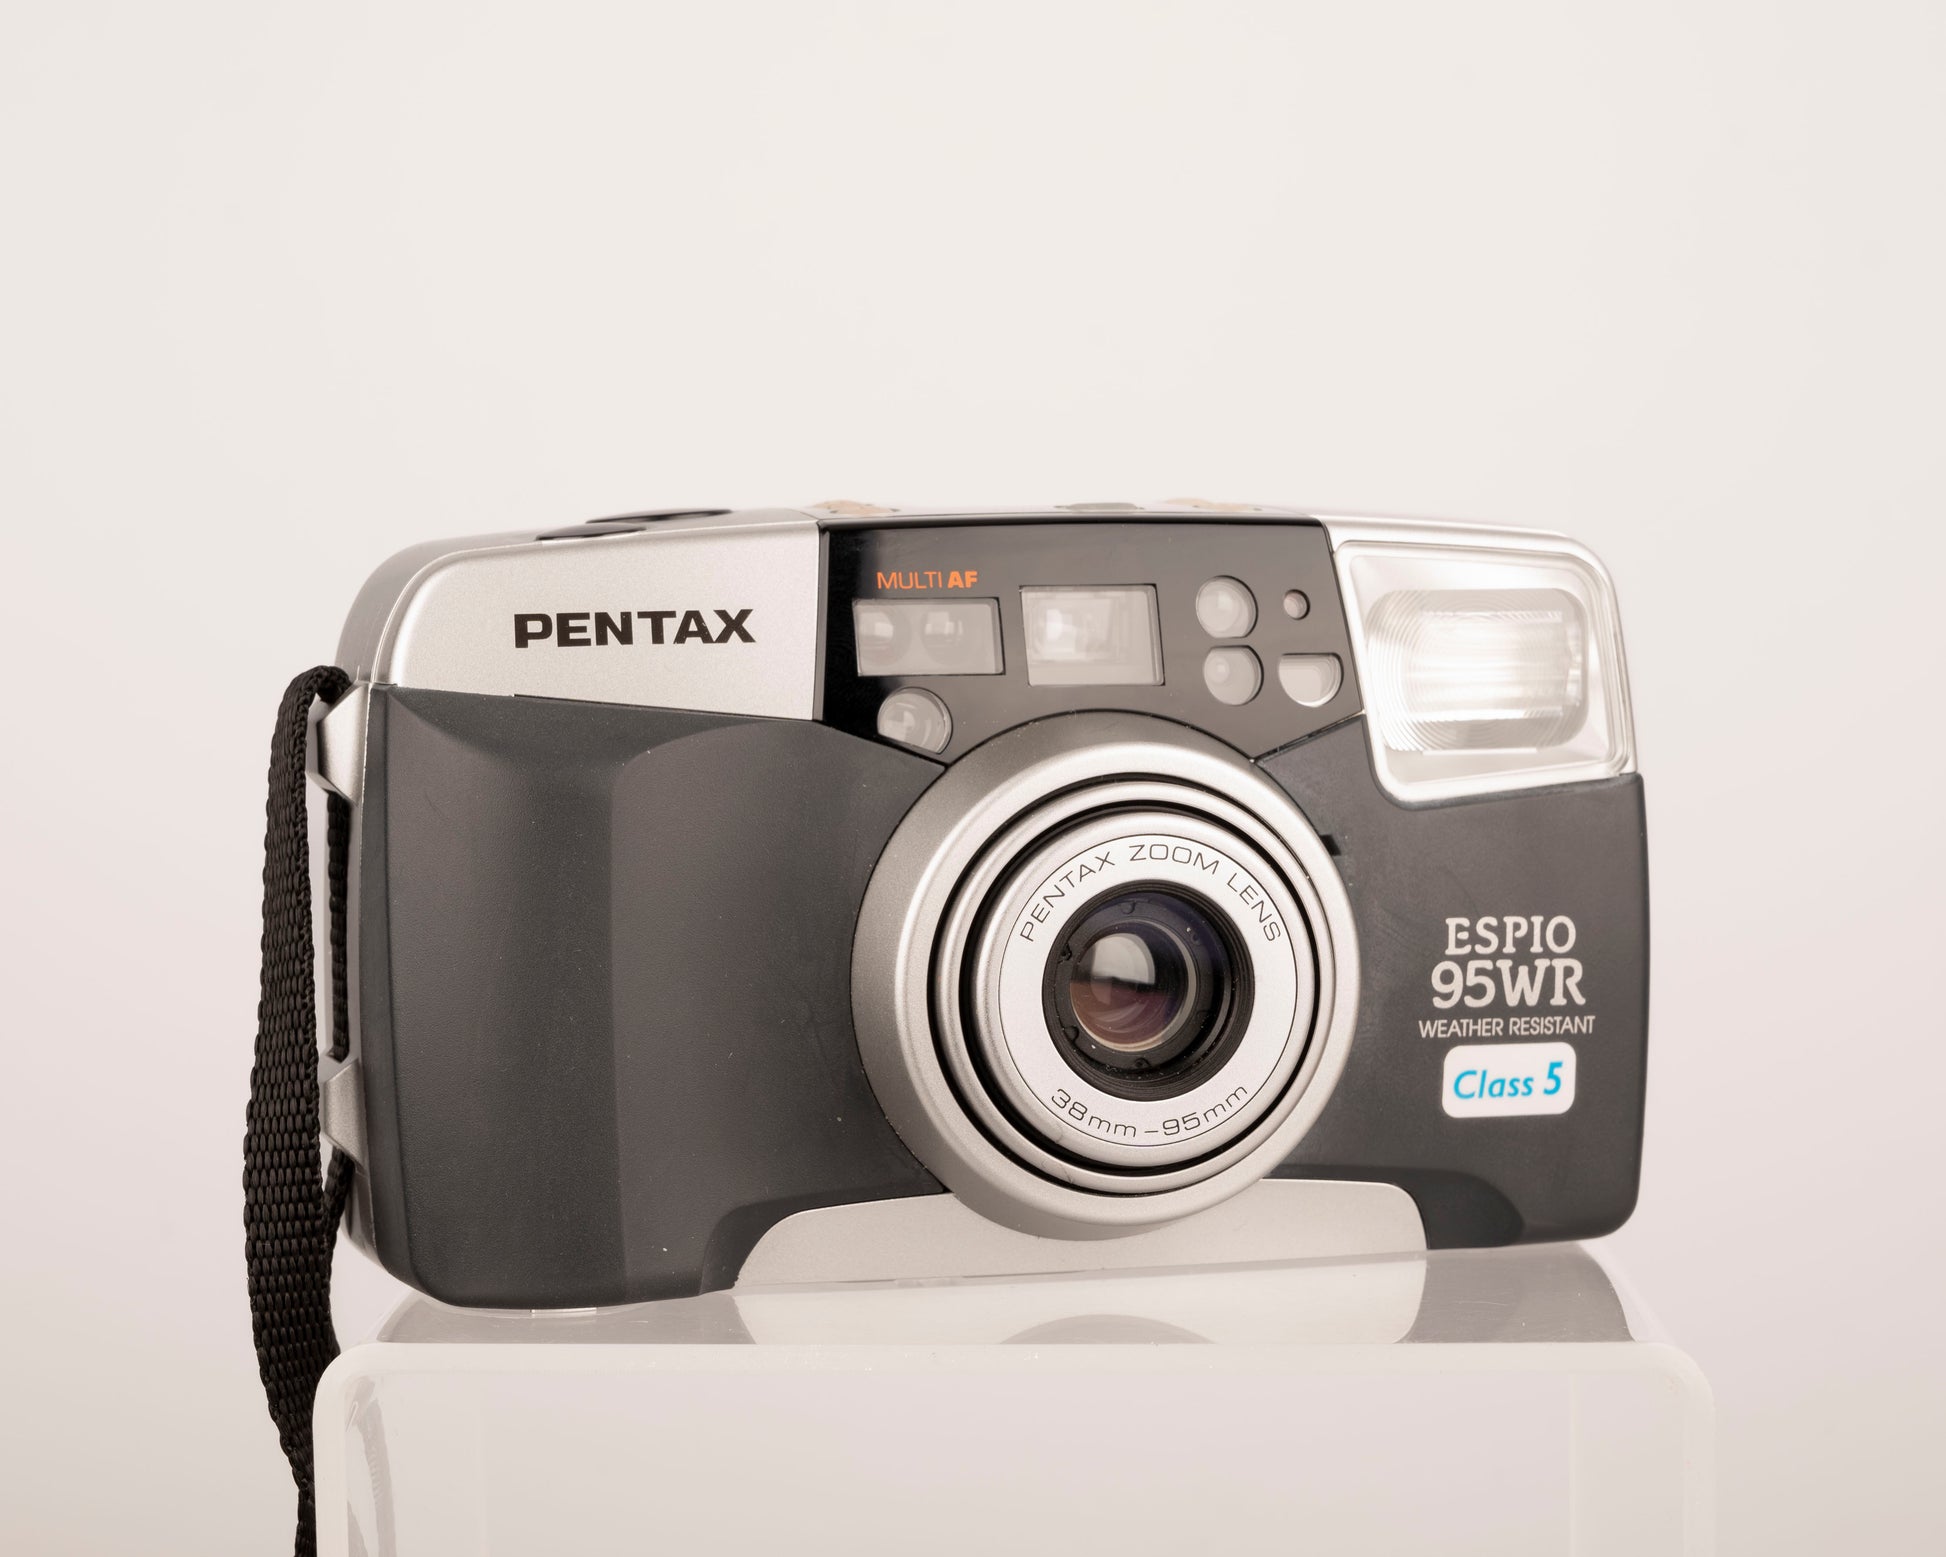 The Pentax Espio 95WR is a high quality zoom 35mm point-and-shoot 